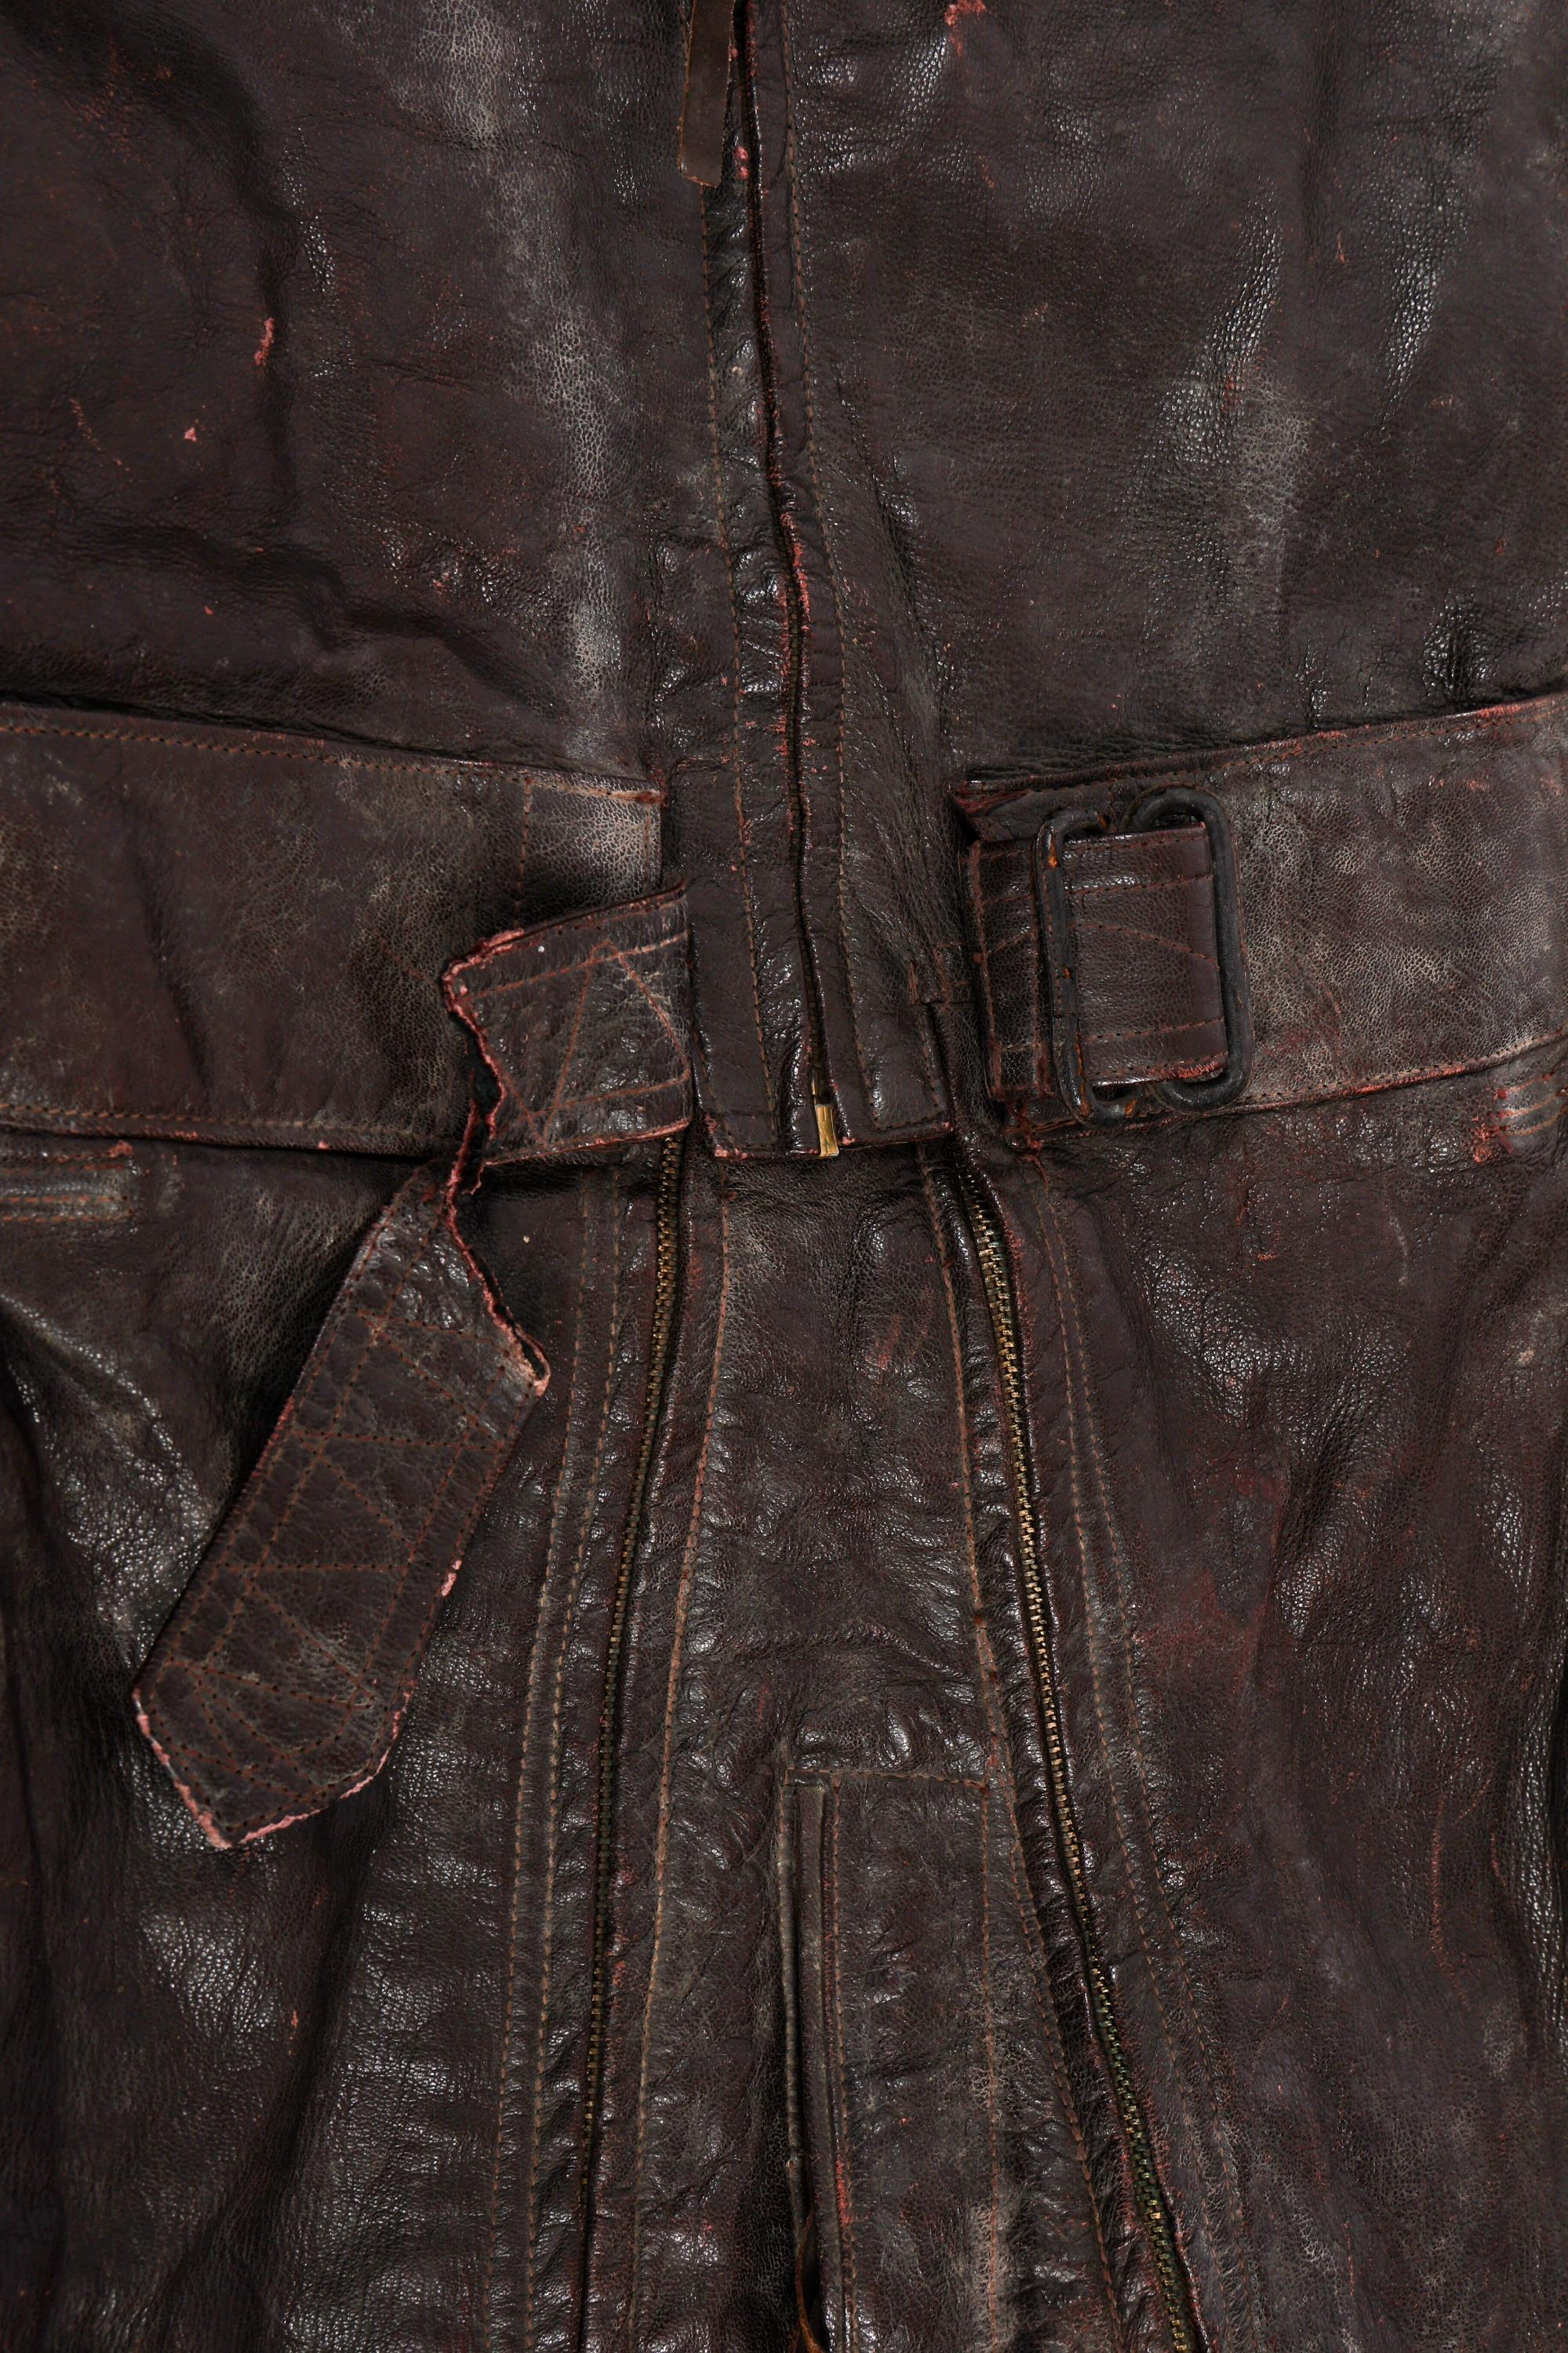 WWII US NAVY CFN-24 HEATED LEATHER FLIGHT SUIT